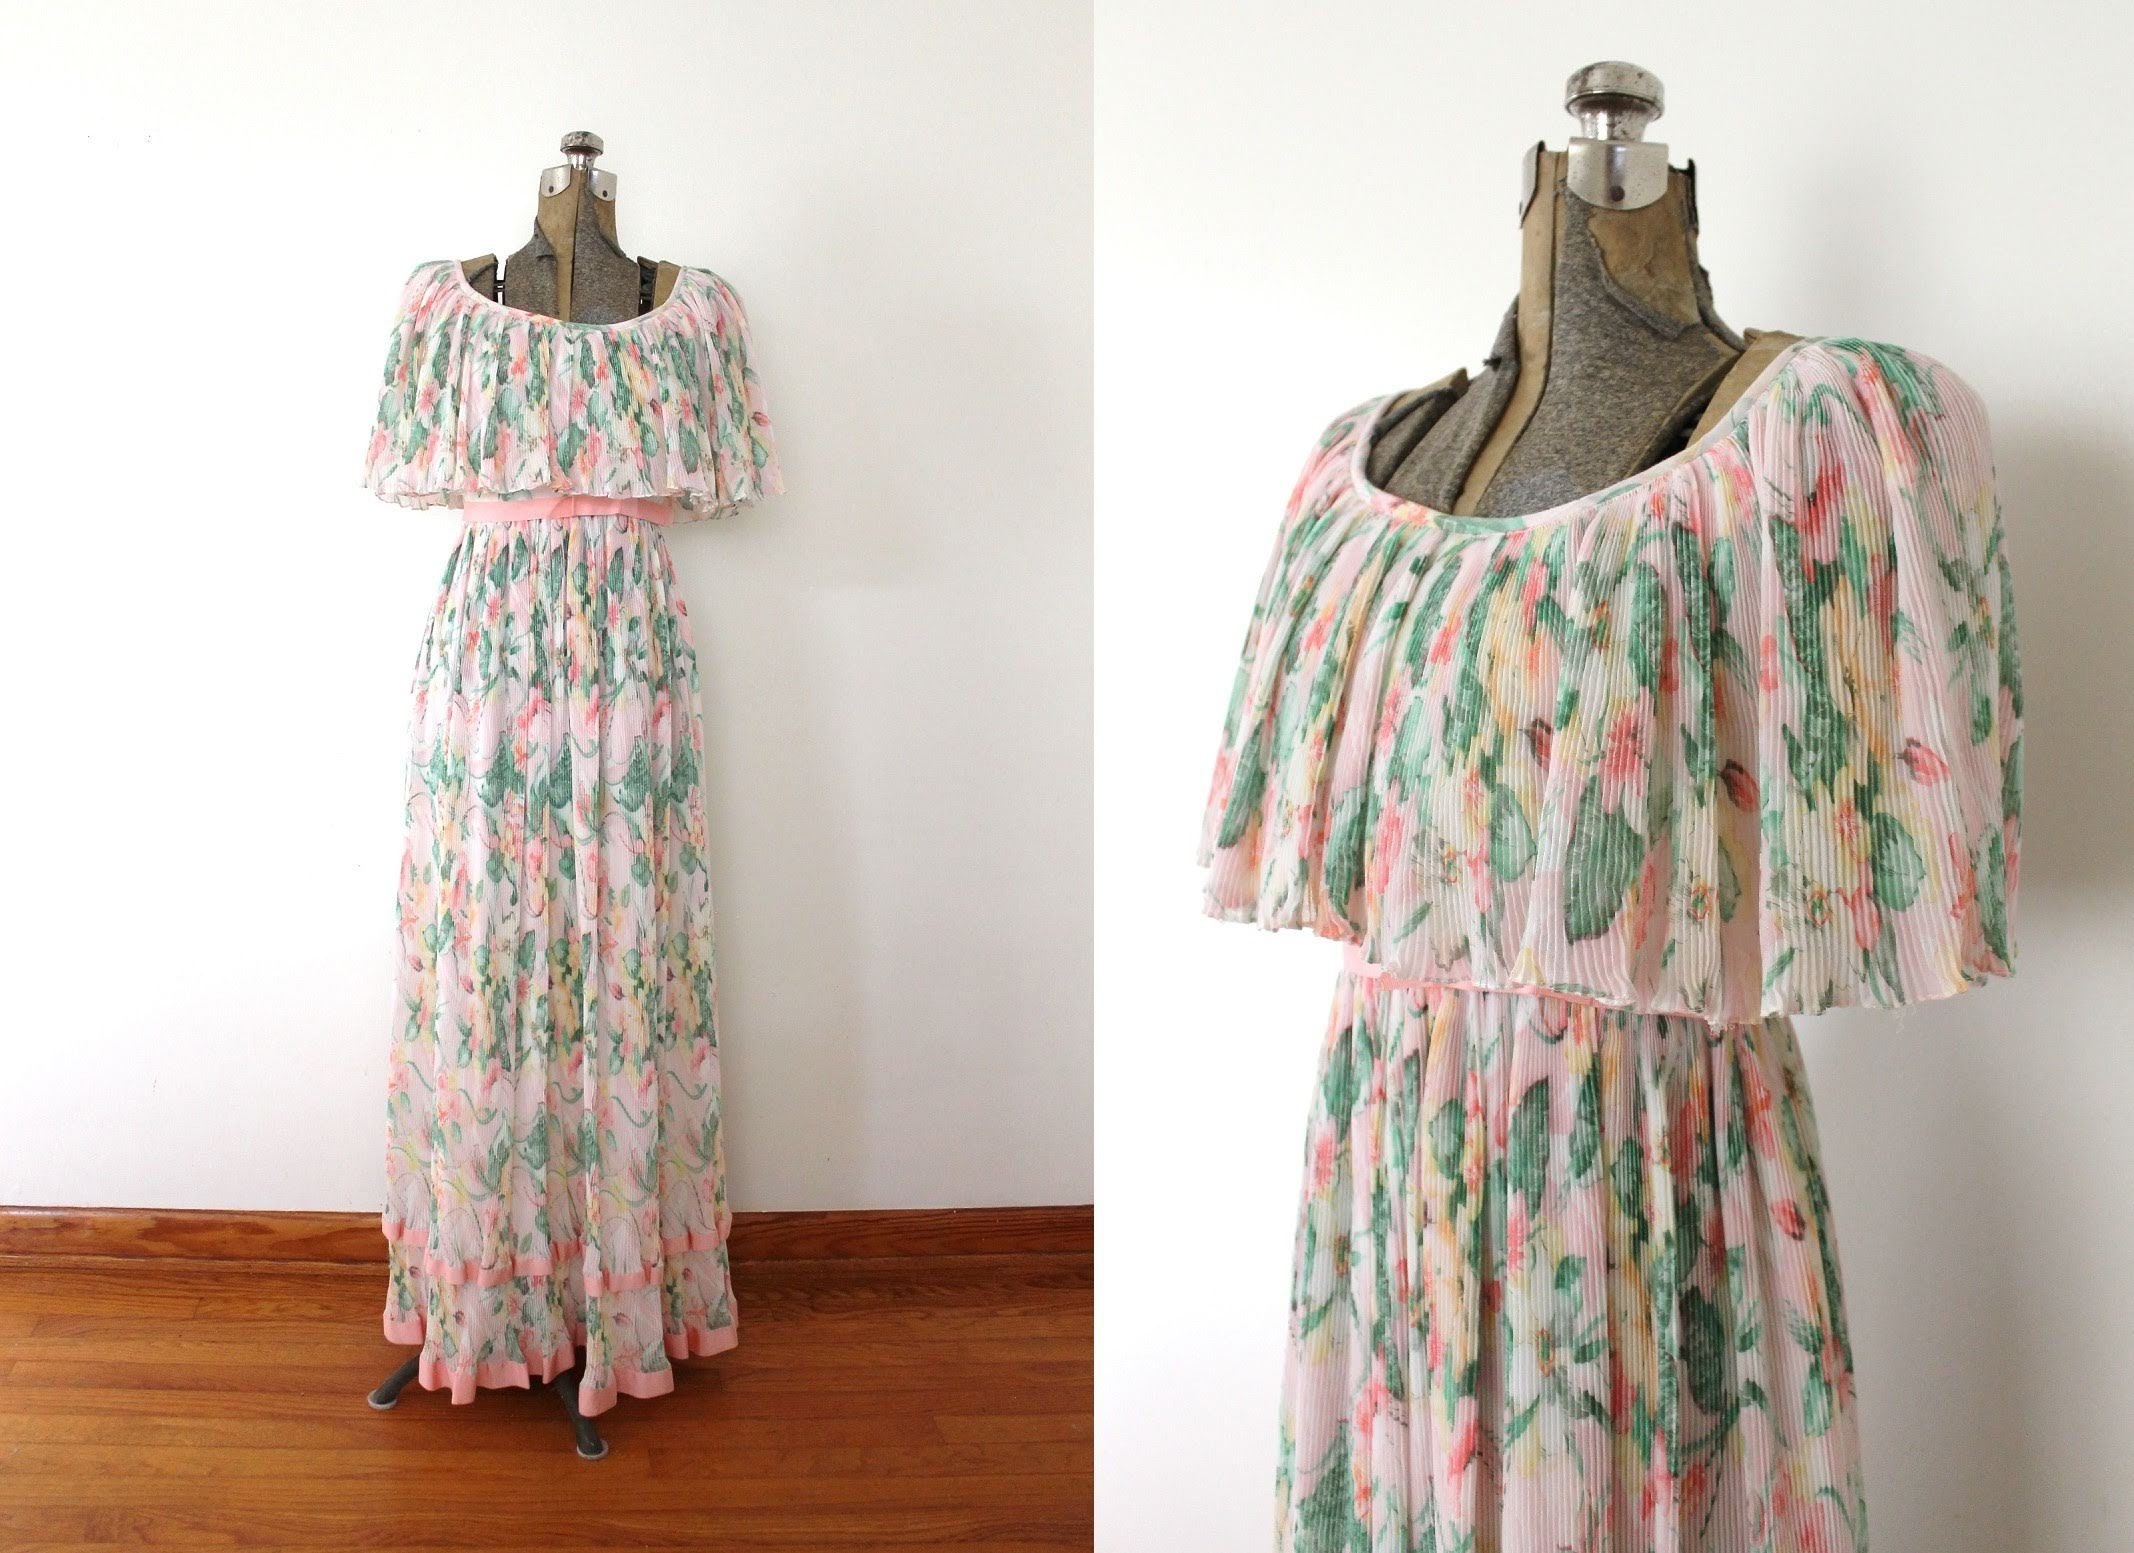 1970s Maxi Dress / 70s Dress / 1970s Pastel Floral Pink and | Etsy